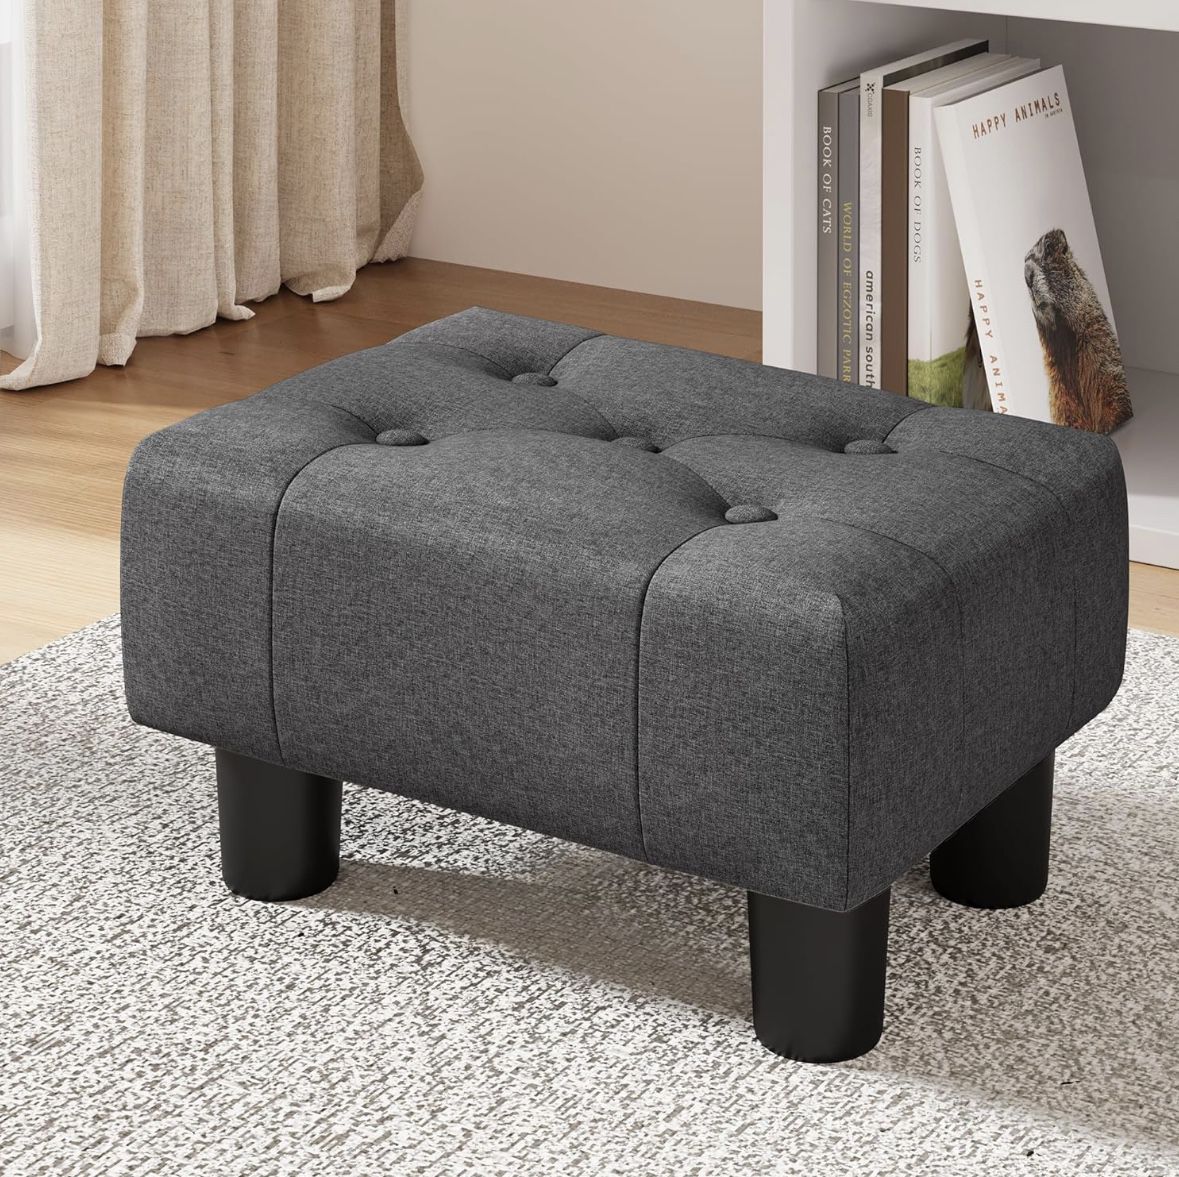 LUE BONA Small Foot Stool Ottoman, Fabric Tufted Footrest with Plastic Legs, 9''H, Rectangle Foot Stools for Adult with Non-Slip Pads, Footstool for L